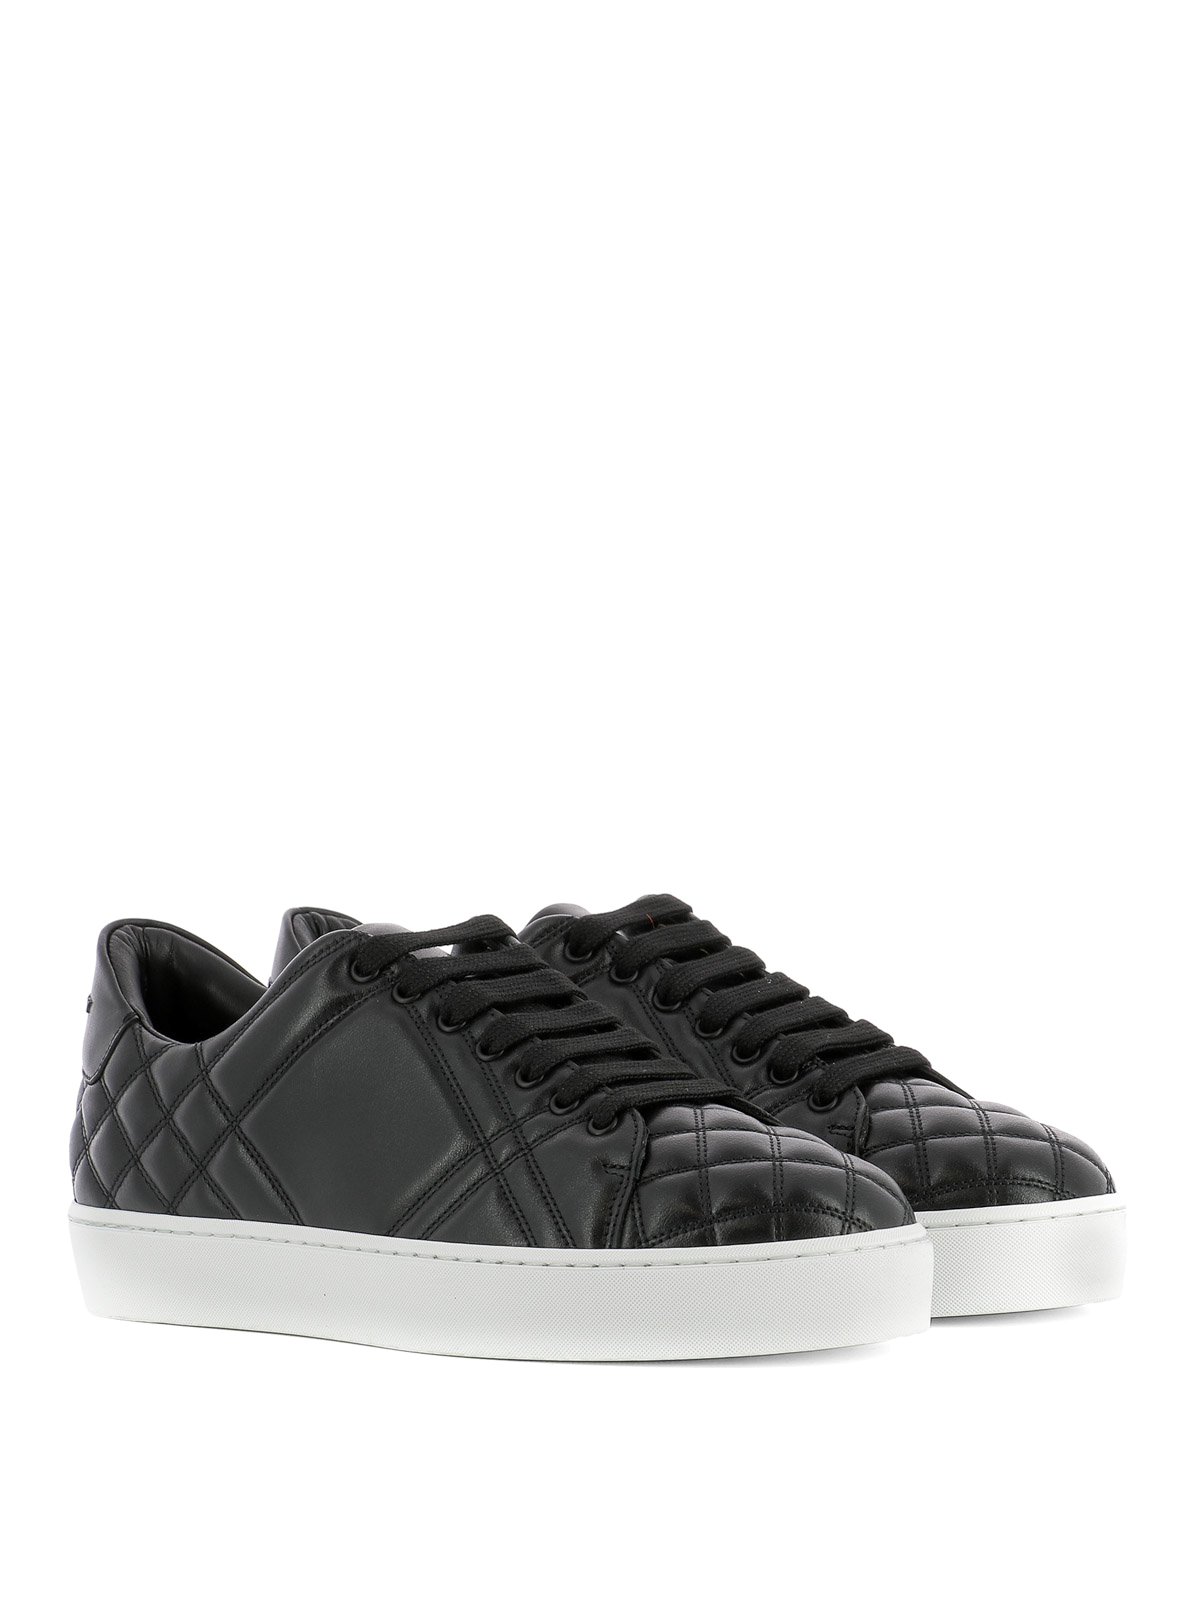 Quilted Comfort: Introducing Burberry Westford Sneakers